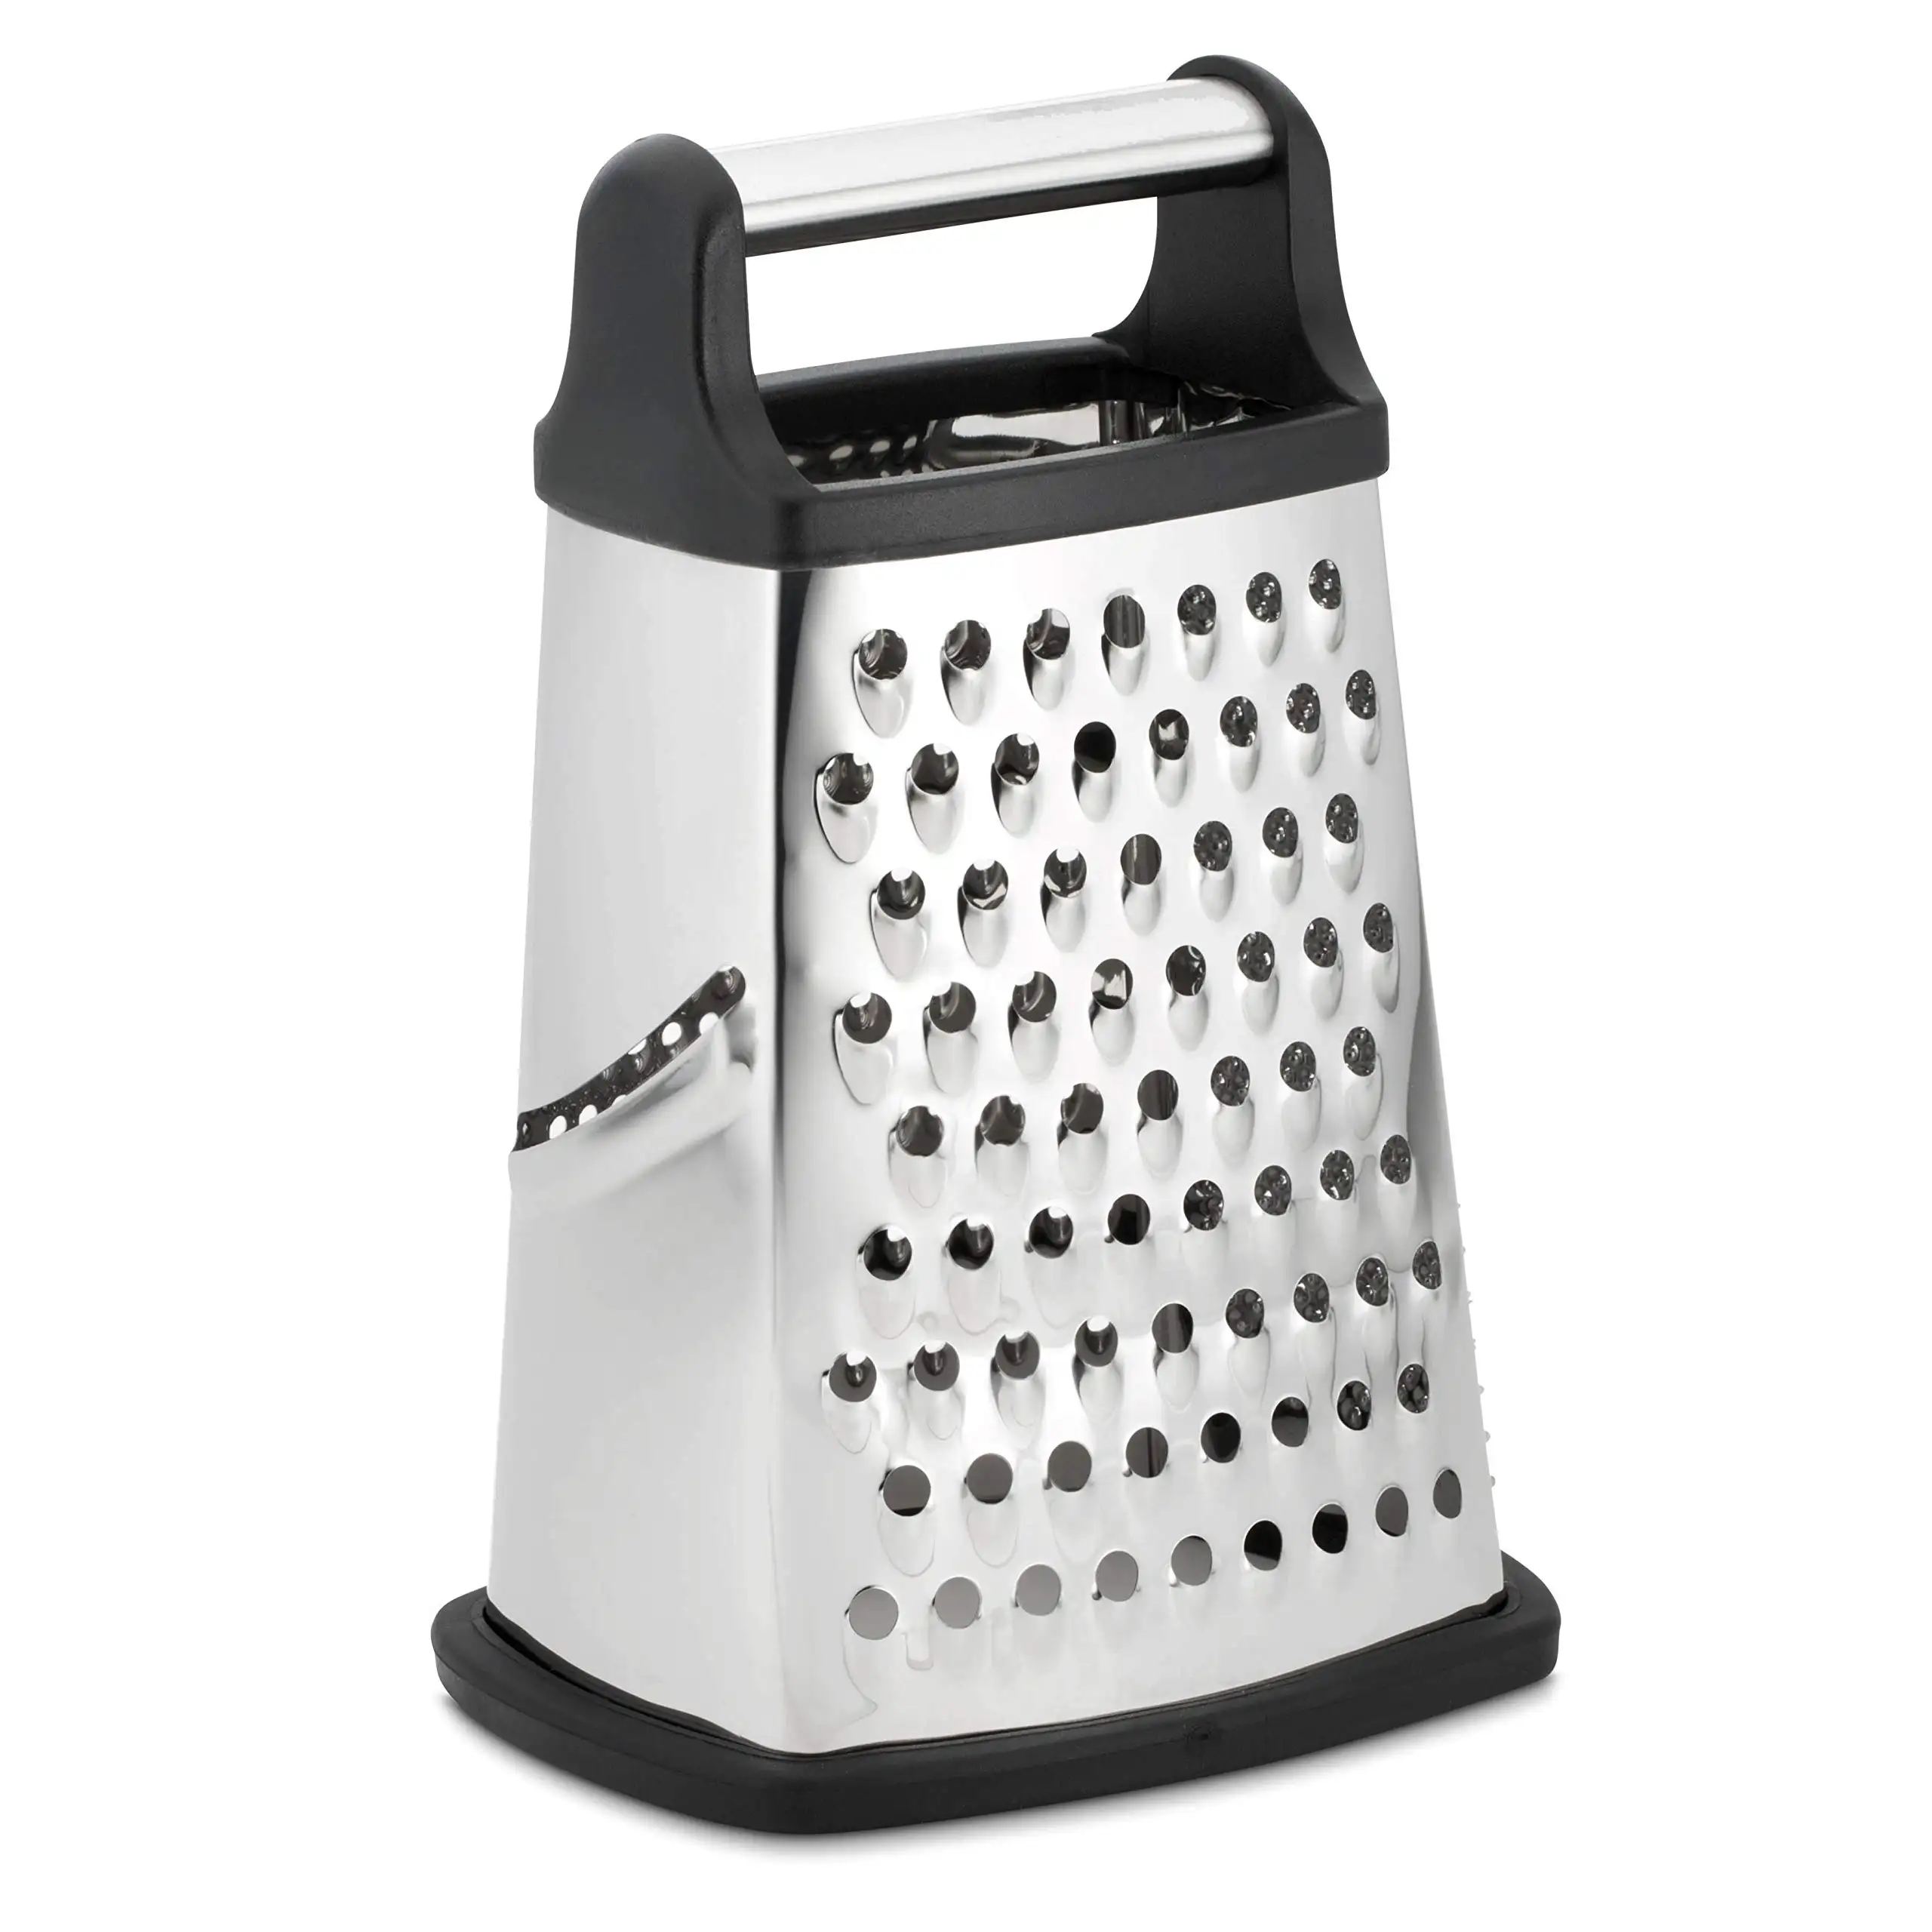 Professional Box Grater Multifunctional 4 Sides Stainless Steel Vegetable Cutter Ginger Cheese Grater